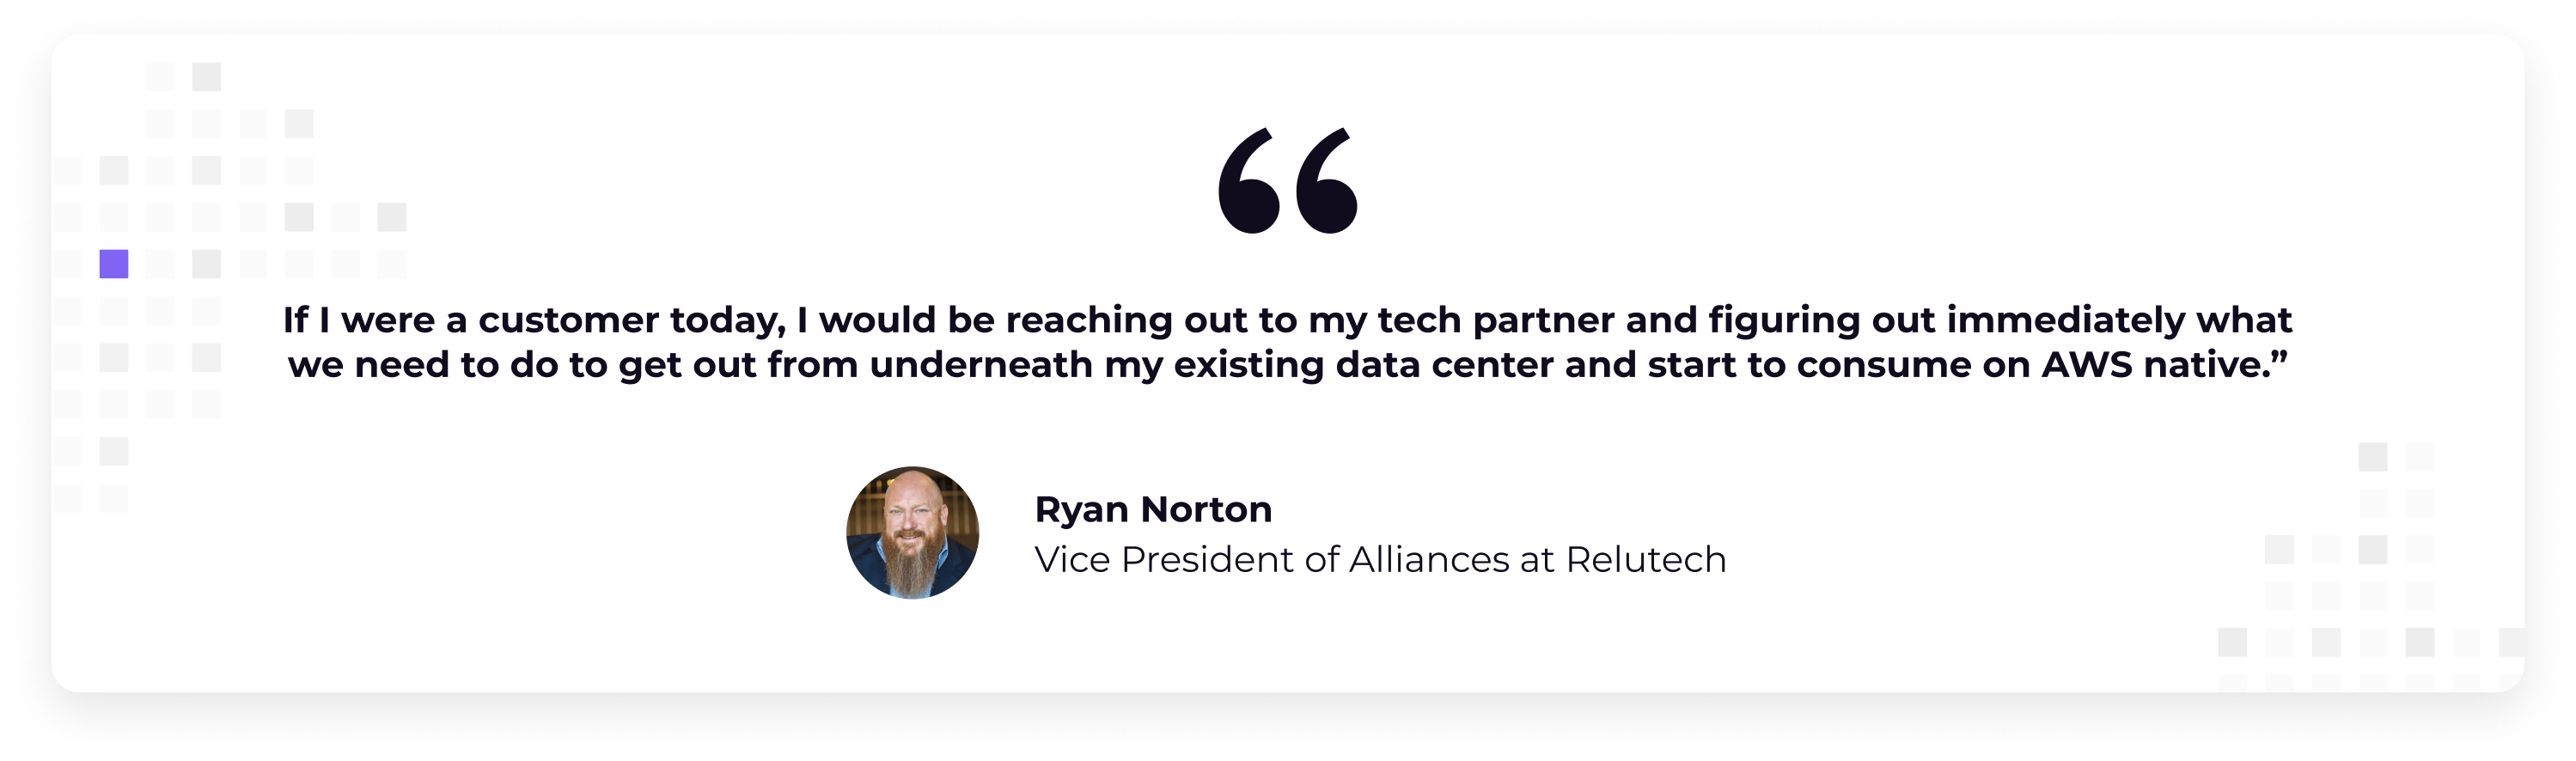 quote "If I were a customer today, I would be reaching out to my tech partner and figuring out immediately what we need to do to get out from underneath my existing data center and start to consume on AWS native” , Ryan Norton, VP AWS Alliances at Relutech 